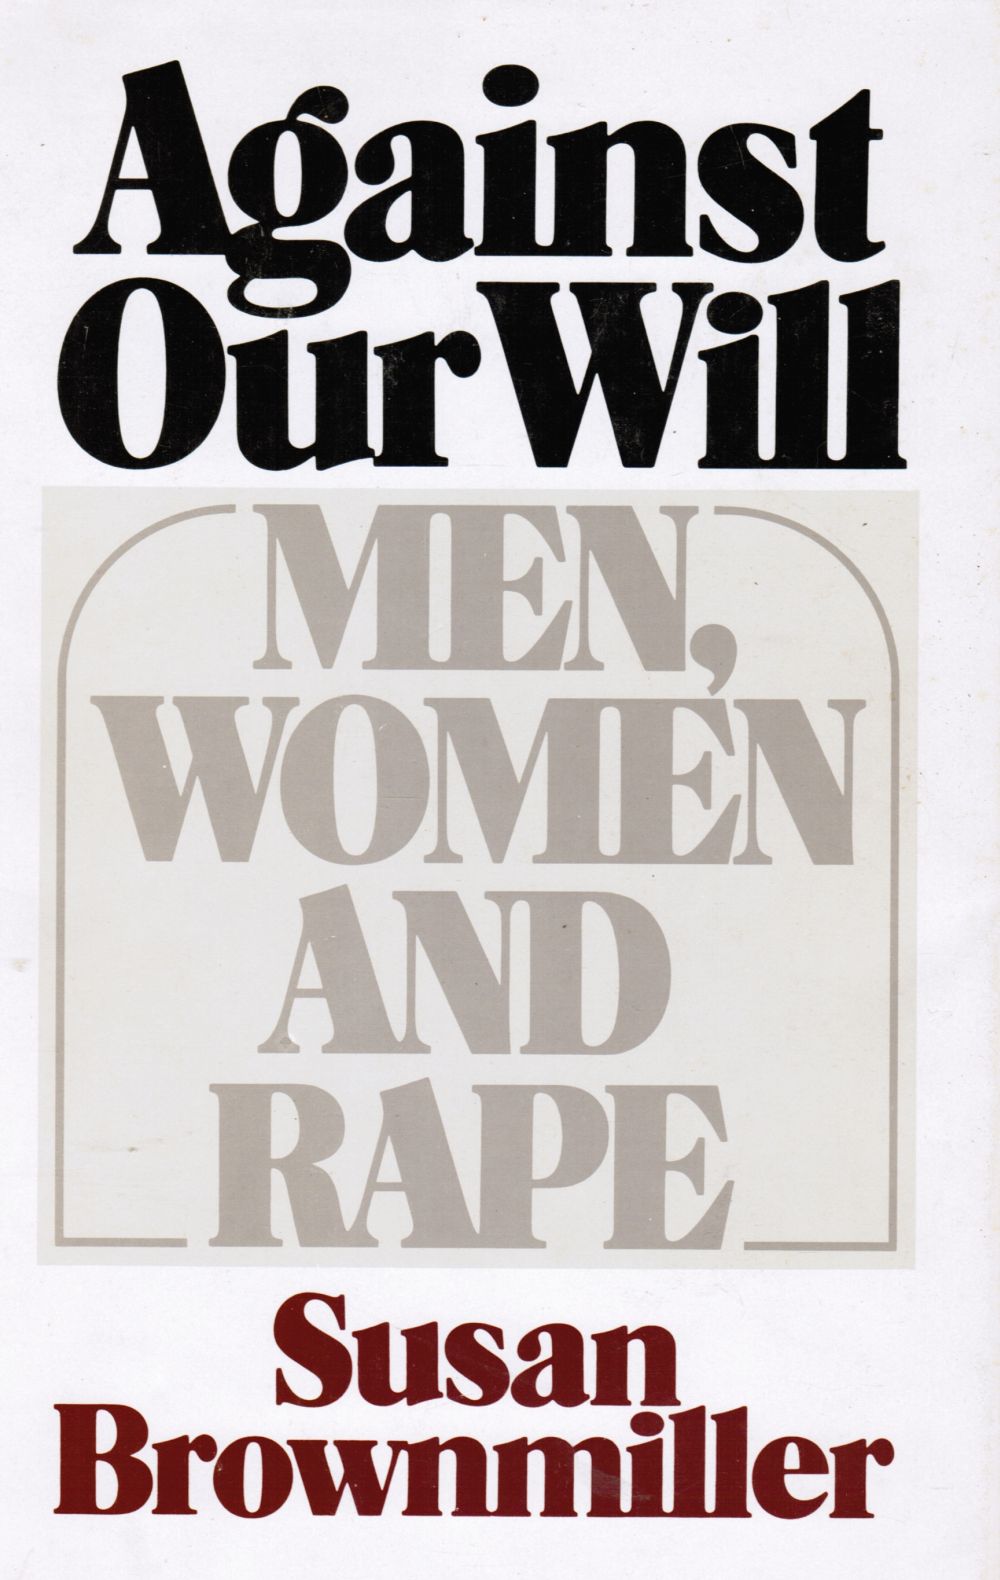 BROWNMILLER, SUSAN - Against Our Will: Men, Women and Rape